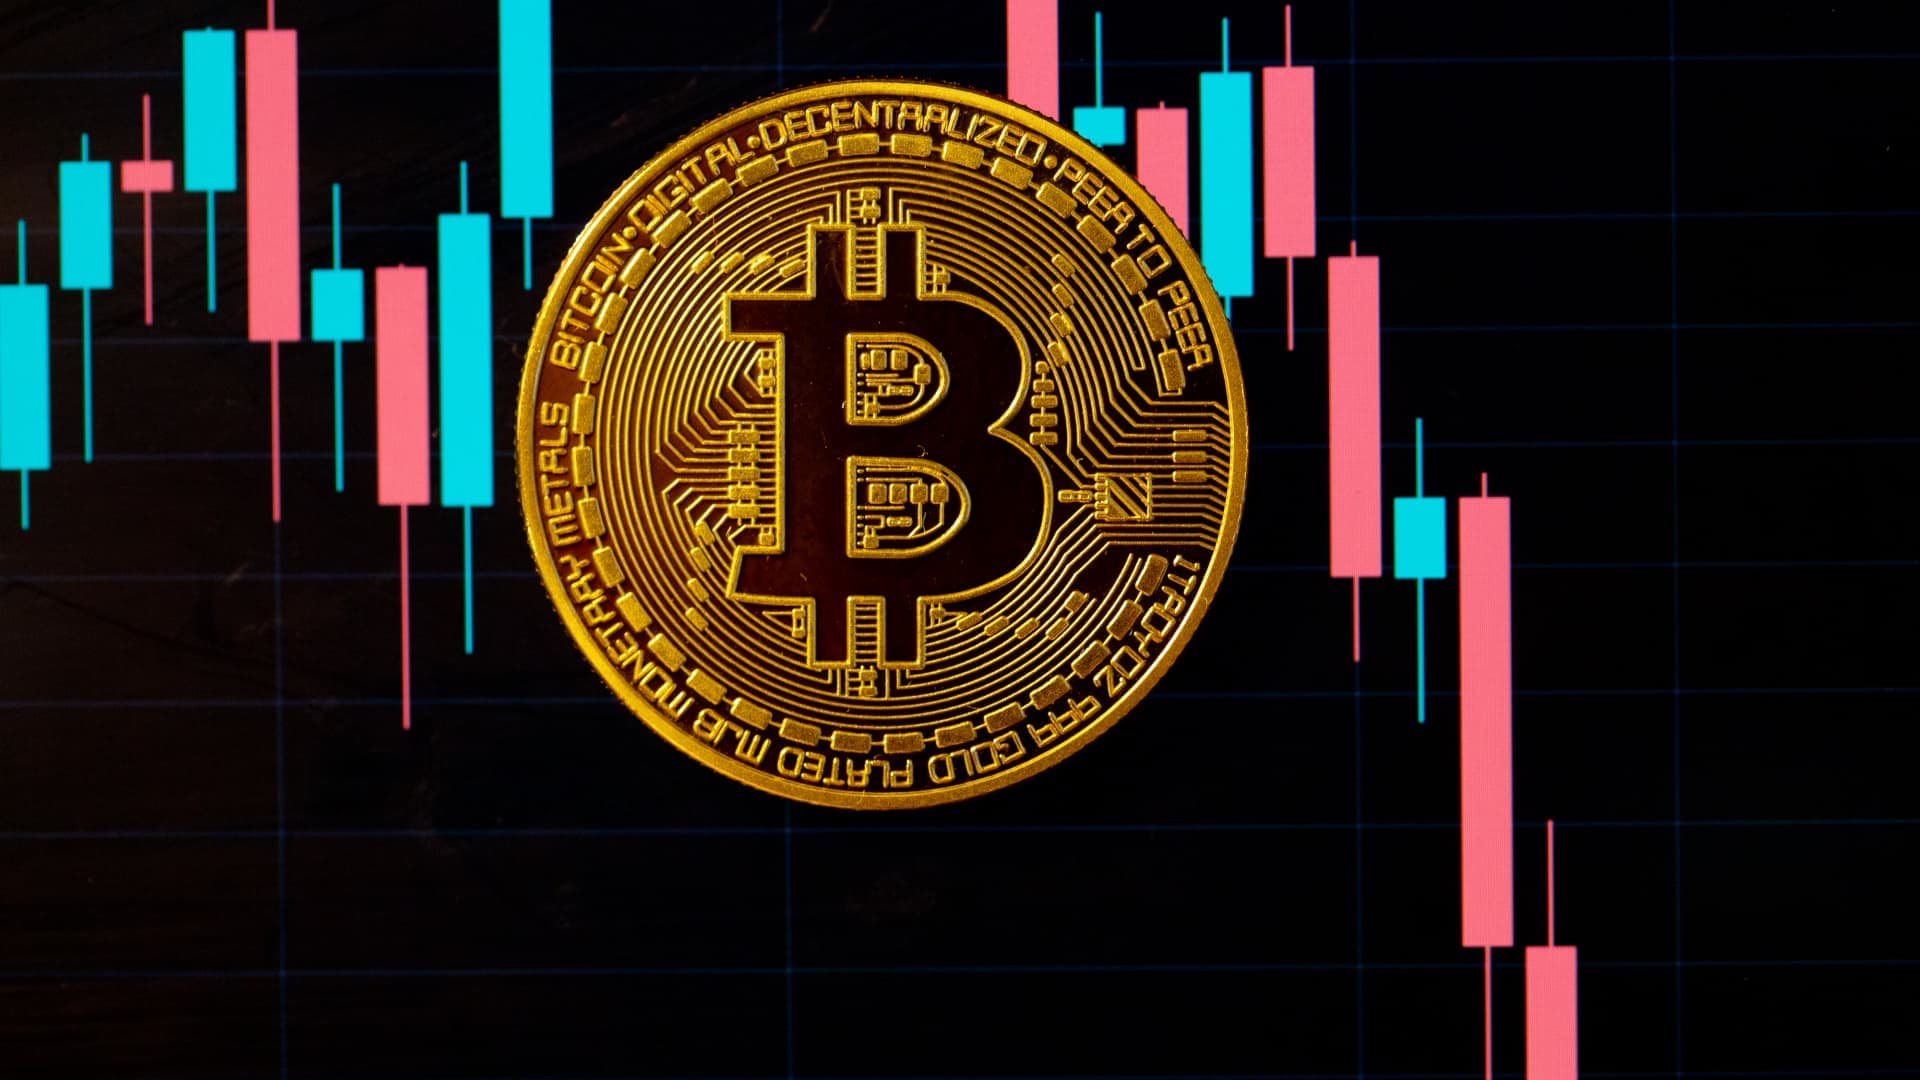 Bitcoin remains the market leader in cryptocurrency, despite the recent fall in active addresses.